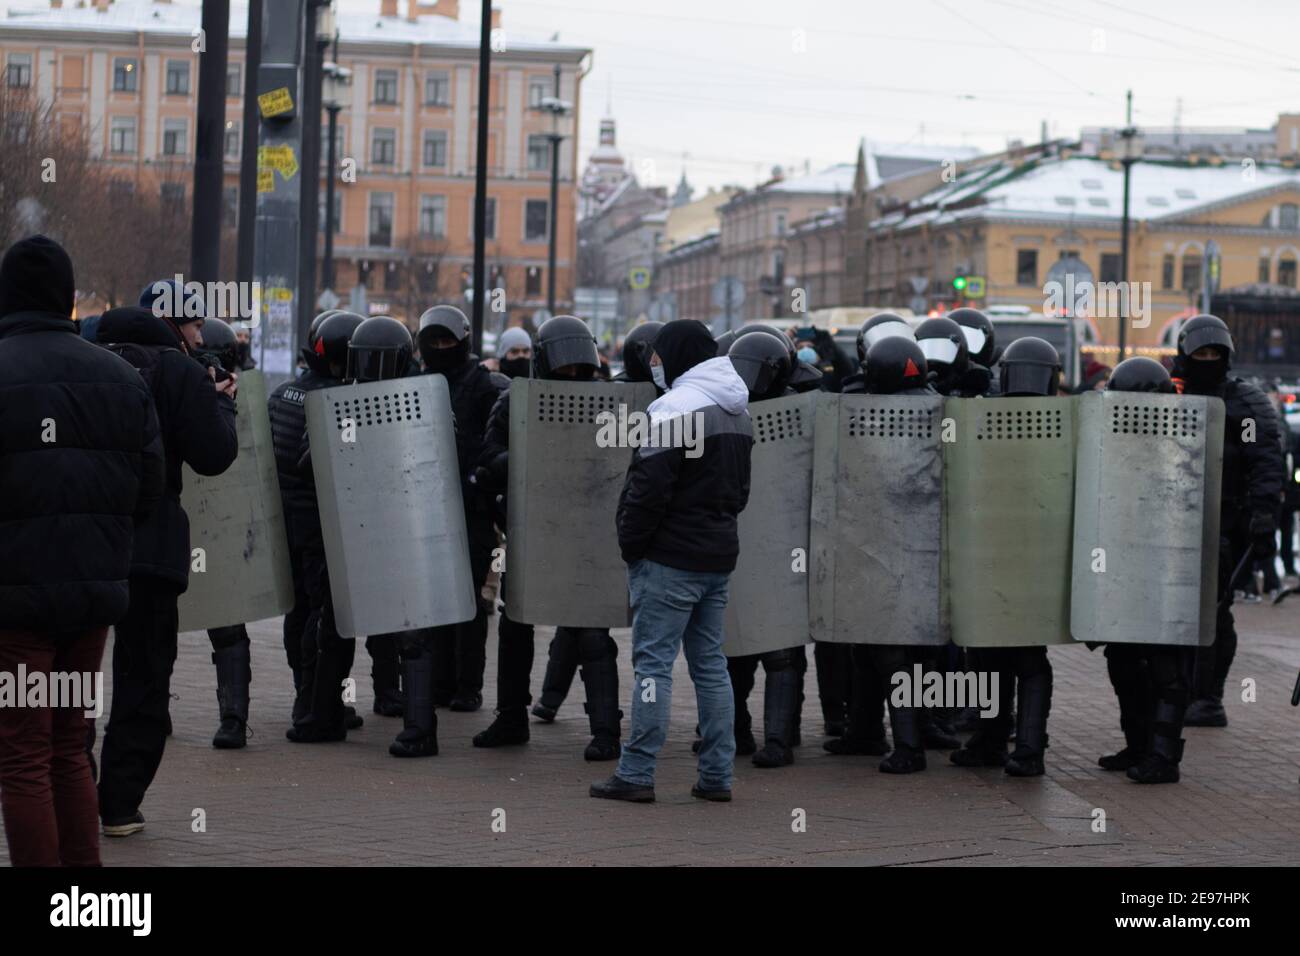 Saint Petersburg, Russia - 31 January 2021: The police surrounded the man on the street, Illustrative Editorial Stock Photo